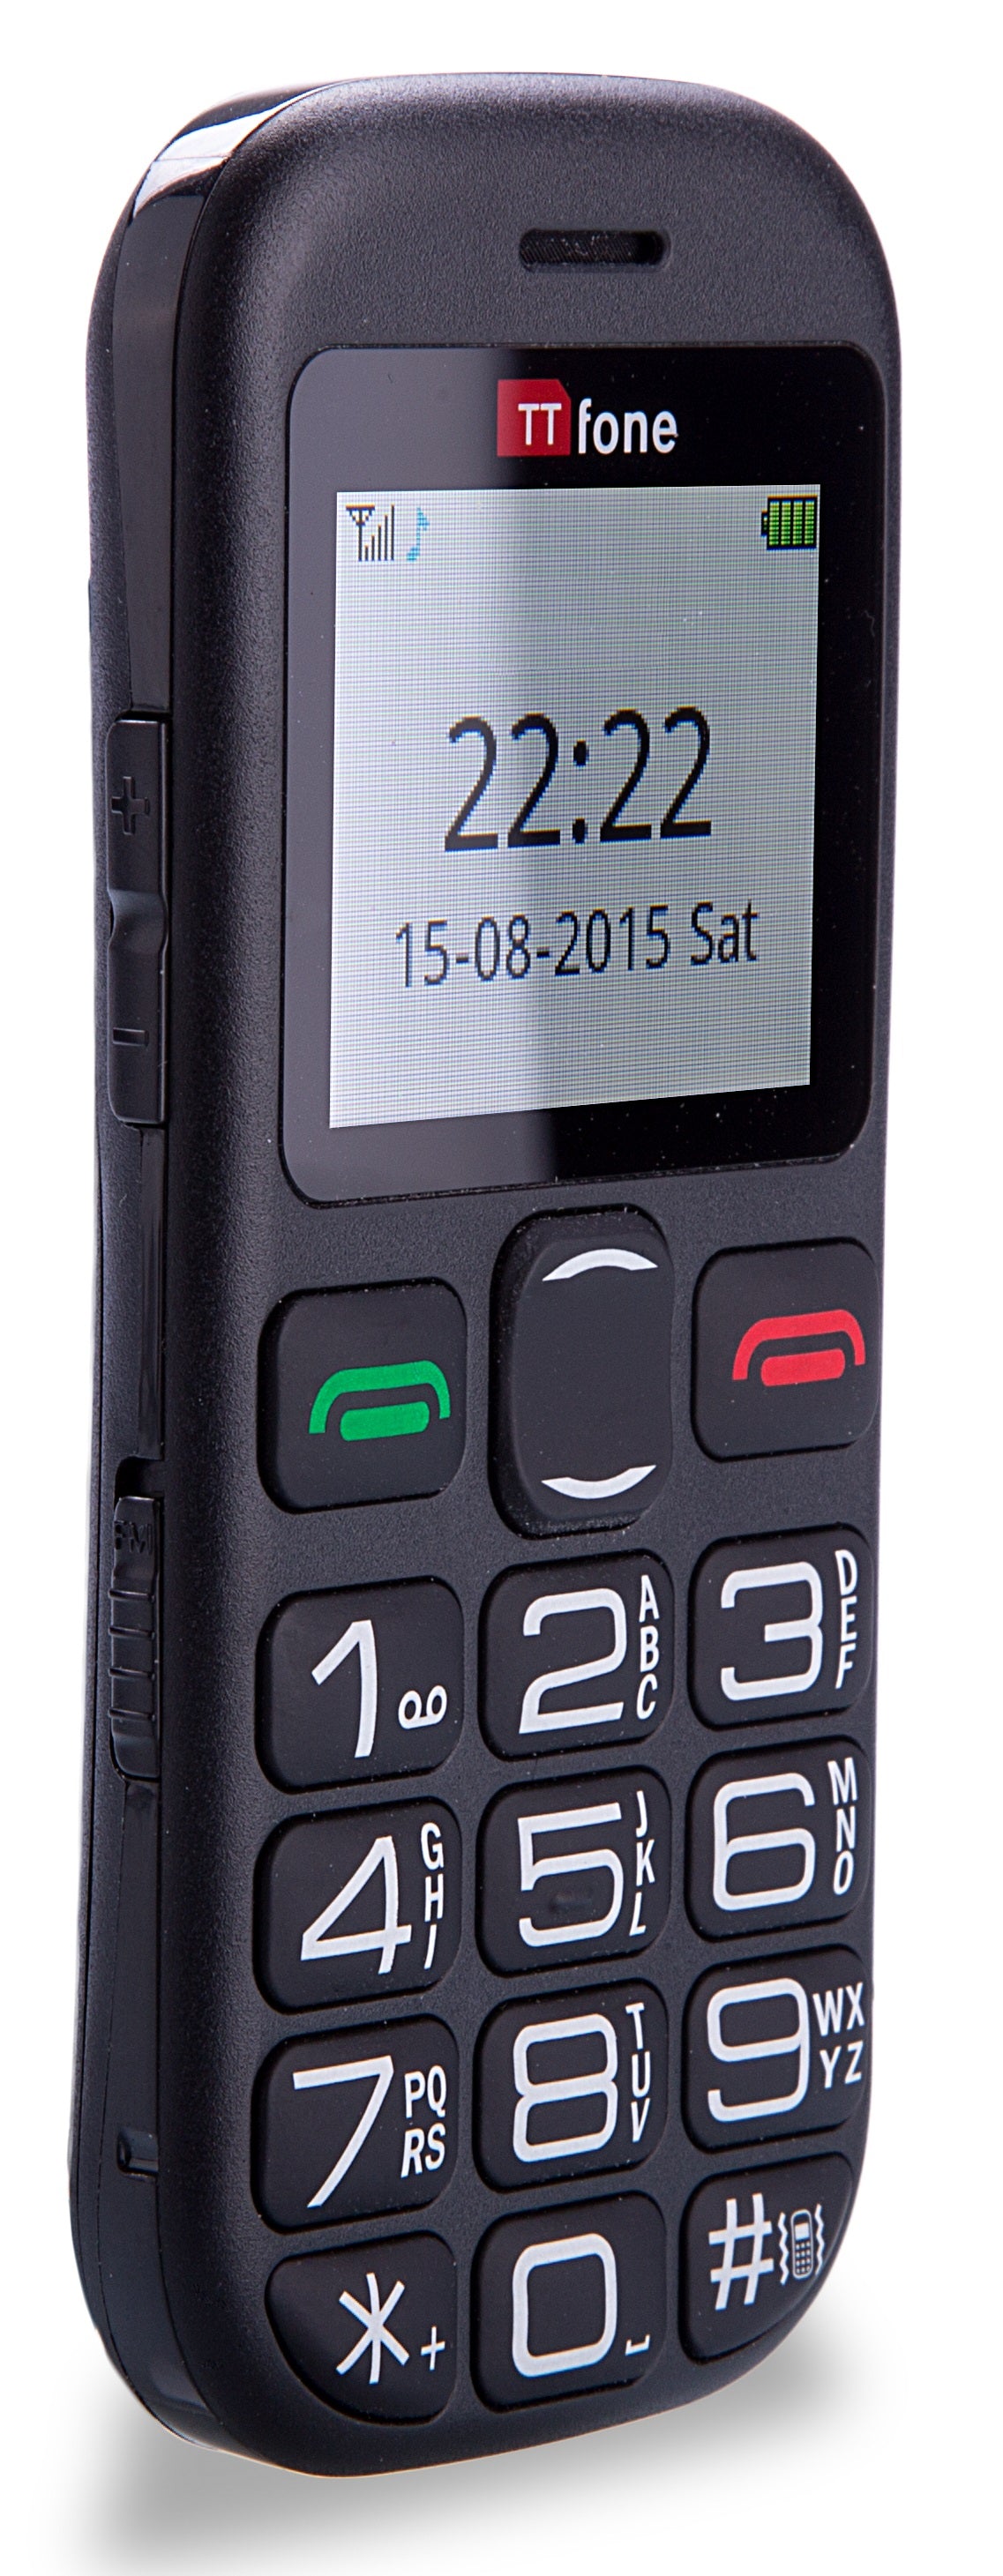 TTfone Jupiter 2 TT850 No Dock Charger- Warehouse Deals with O2 Pay As You Go